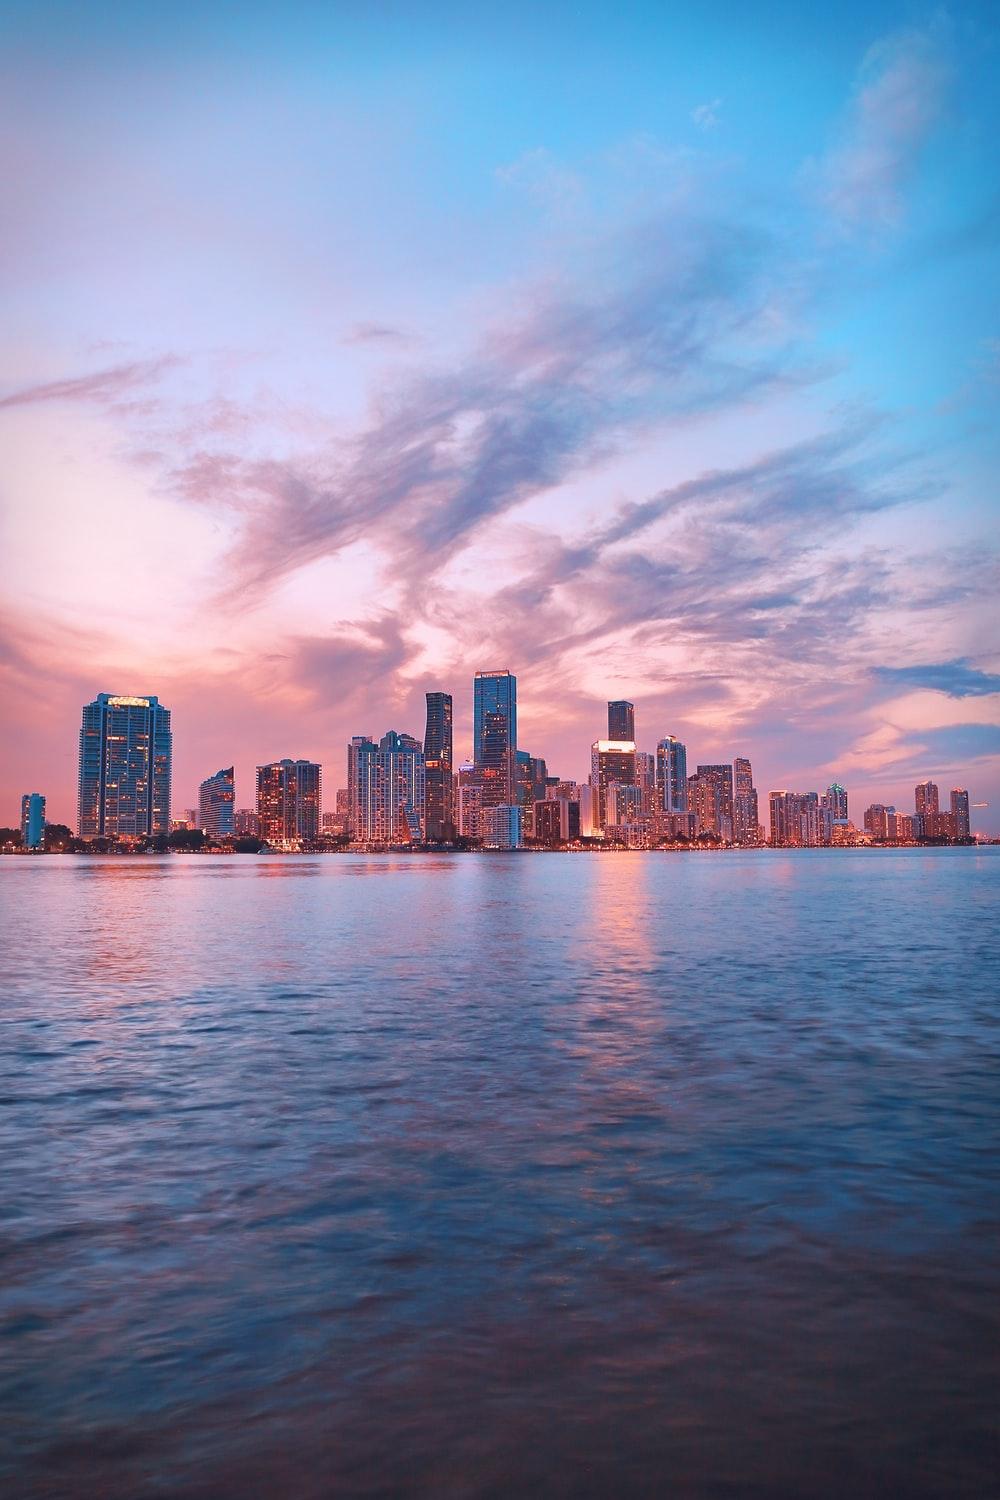 Beautiful Miami Picture. Download Free Image